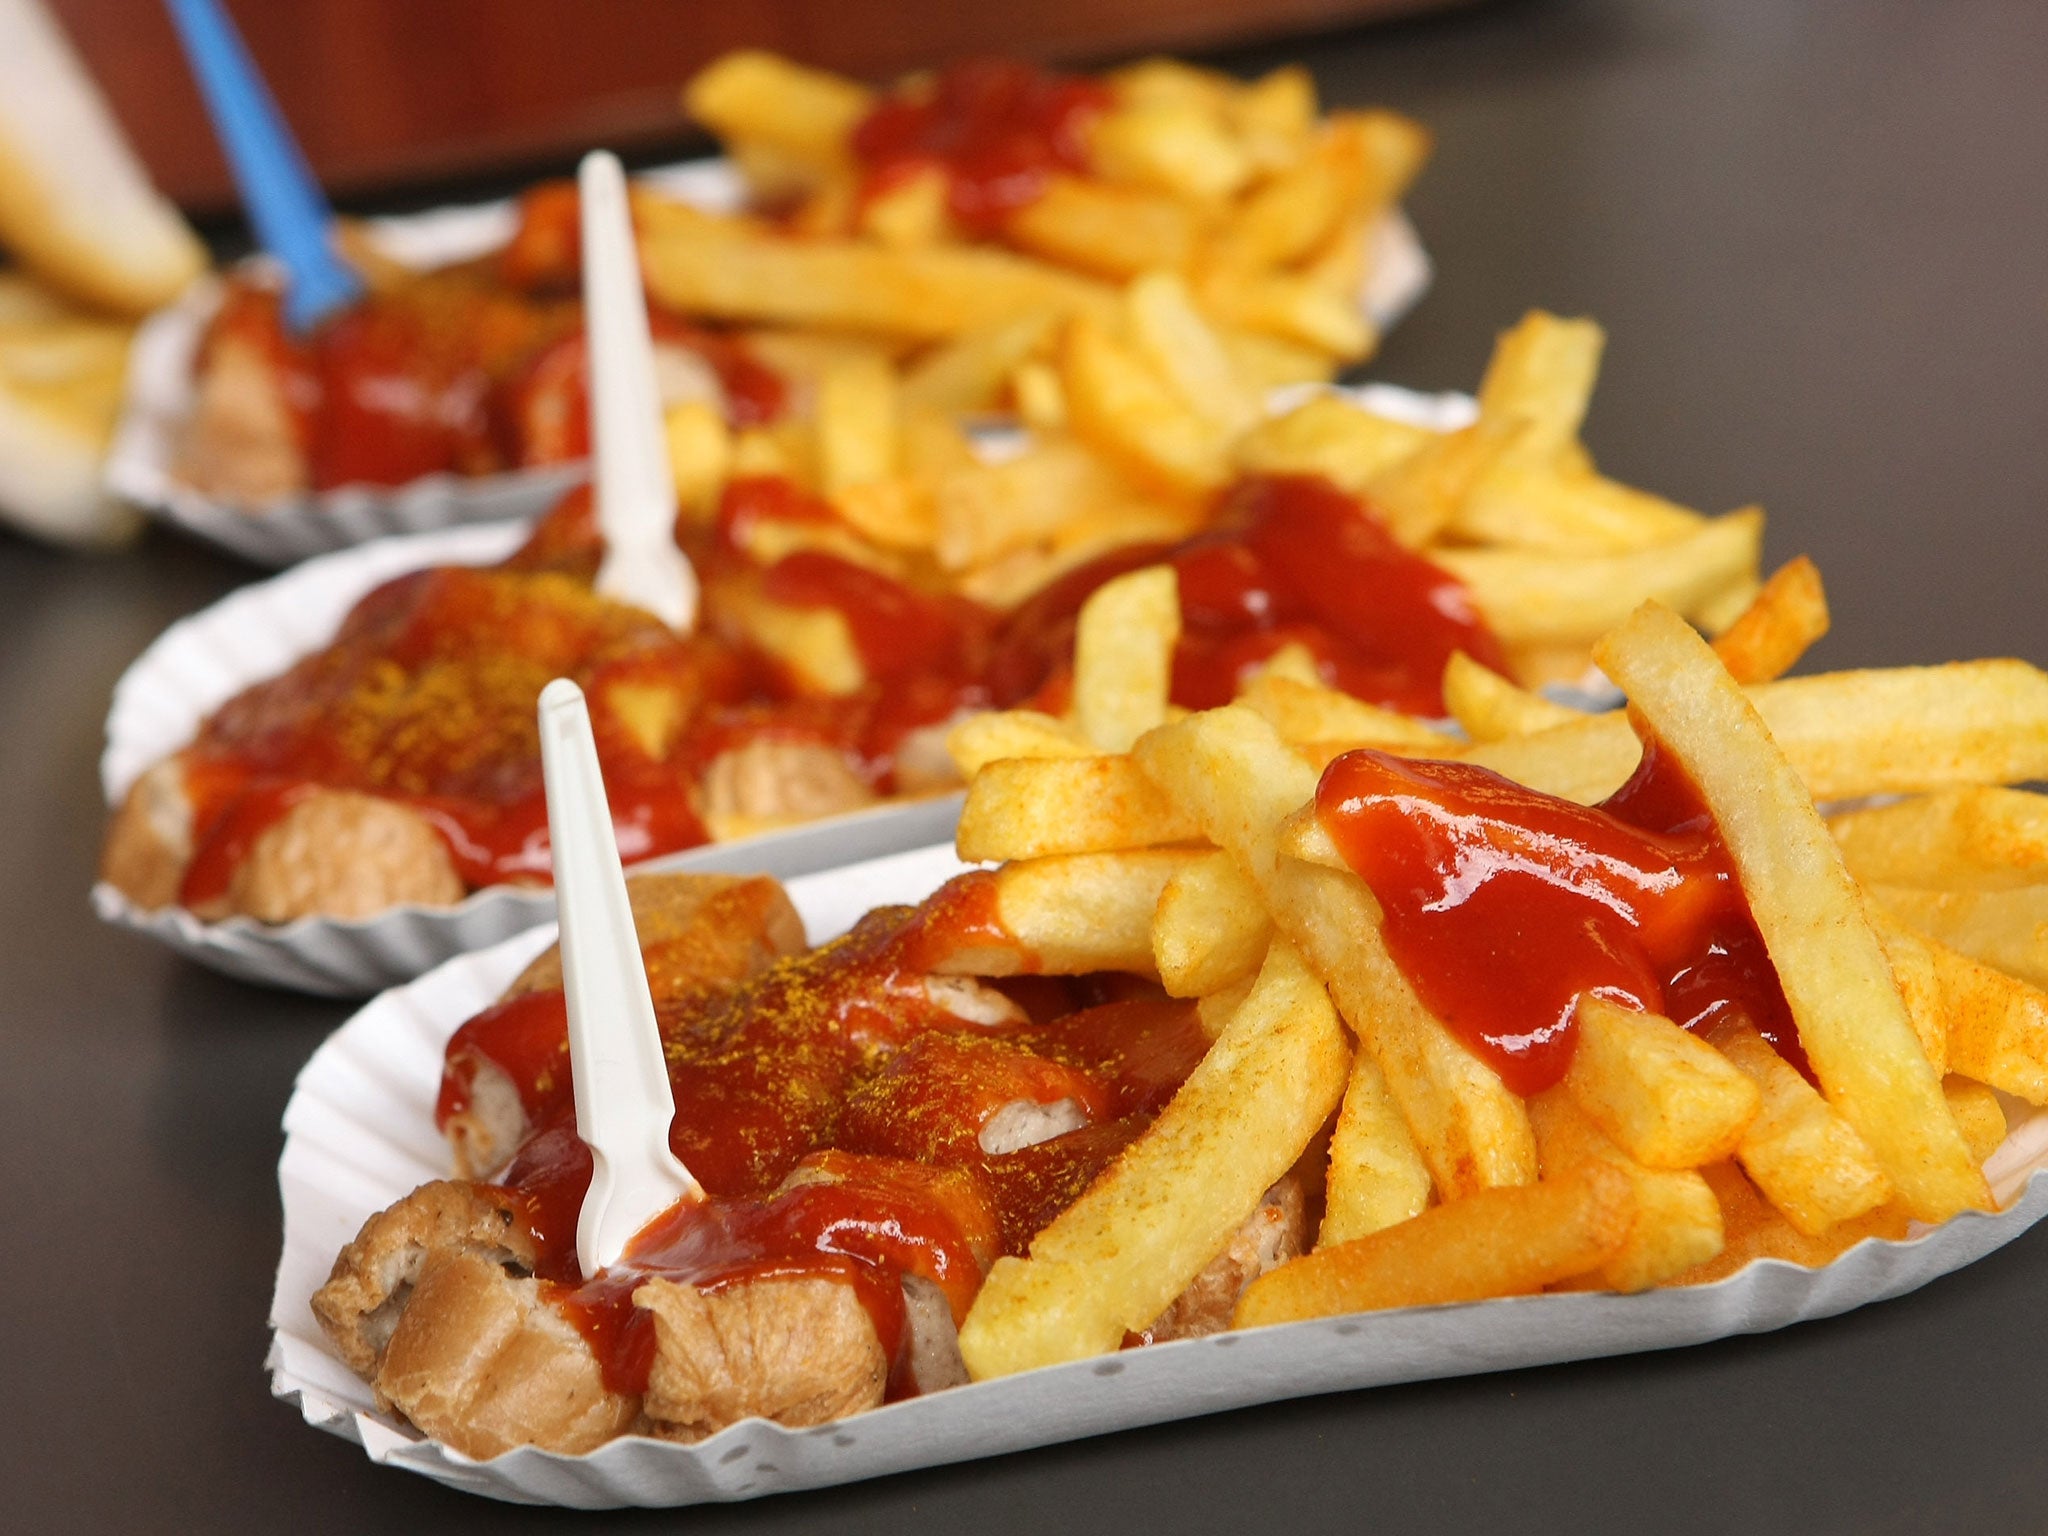 Chips and bratwurst can be enjoyed in moderation